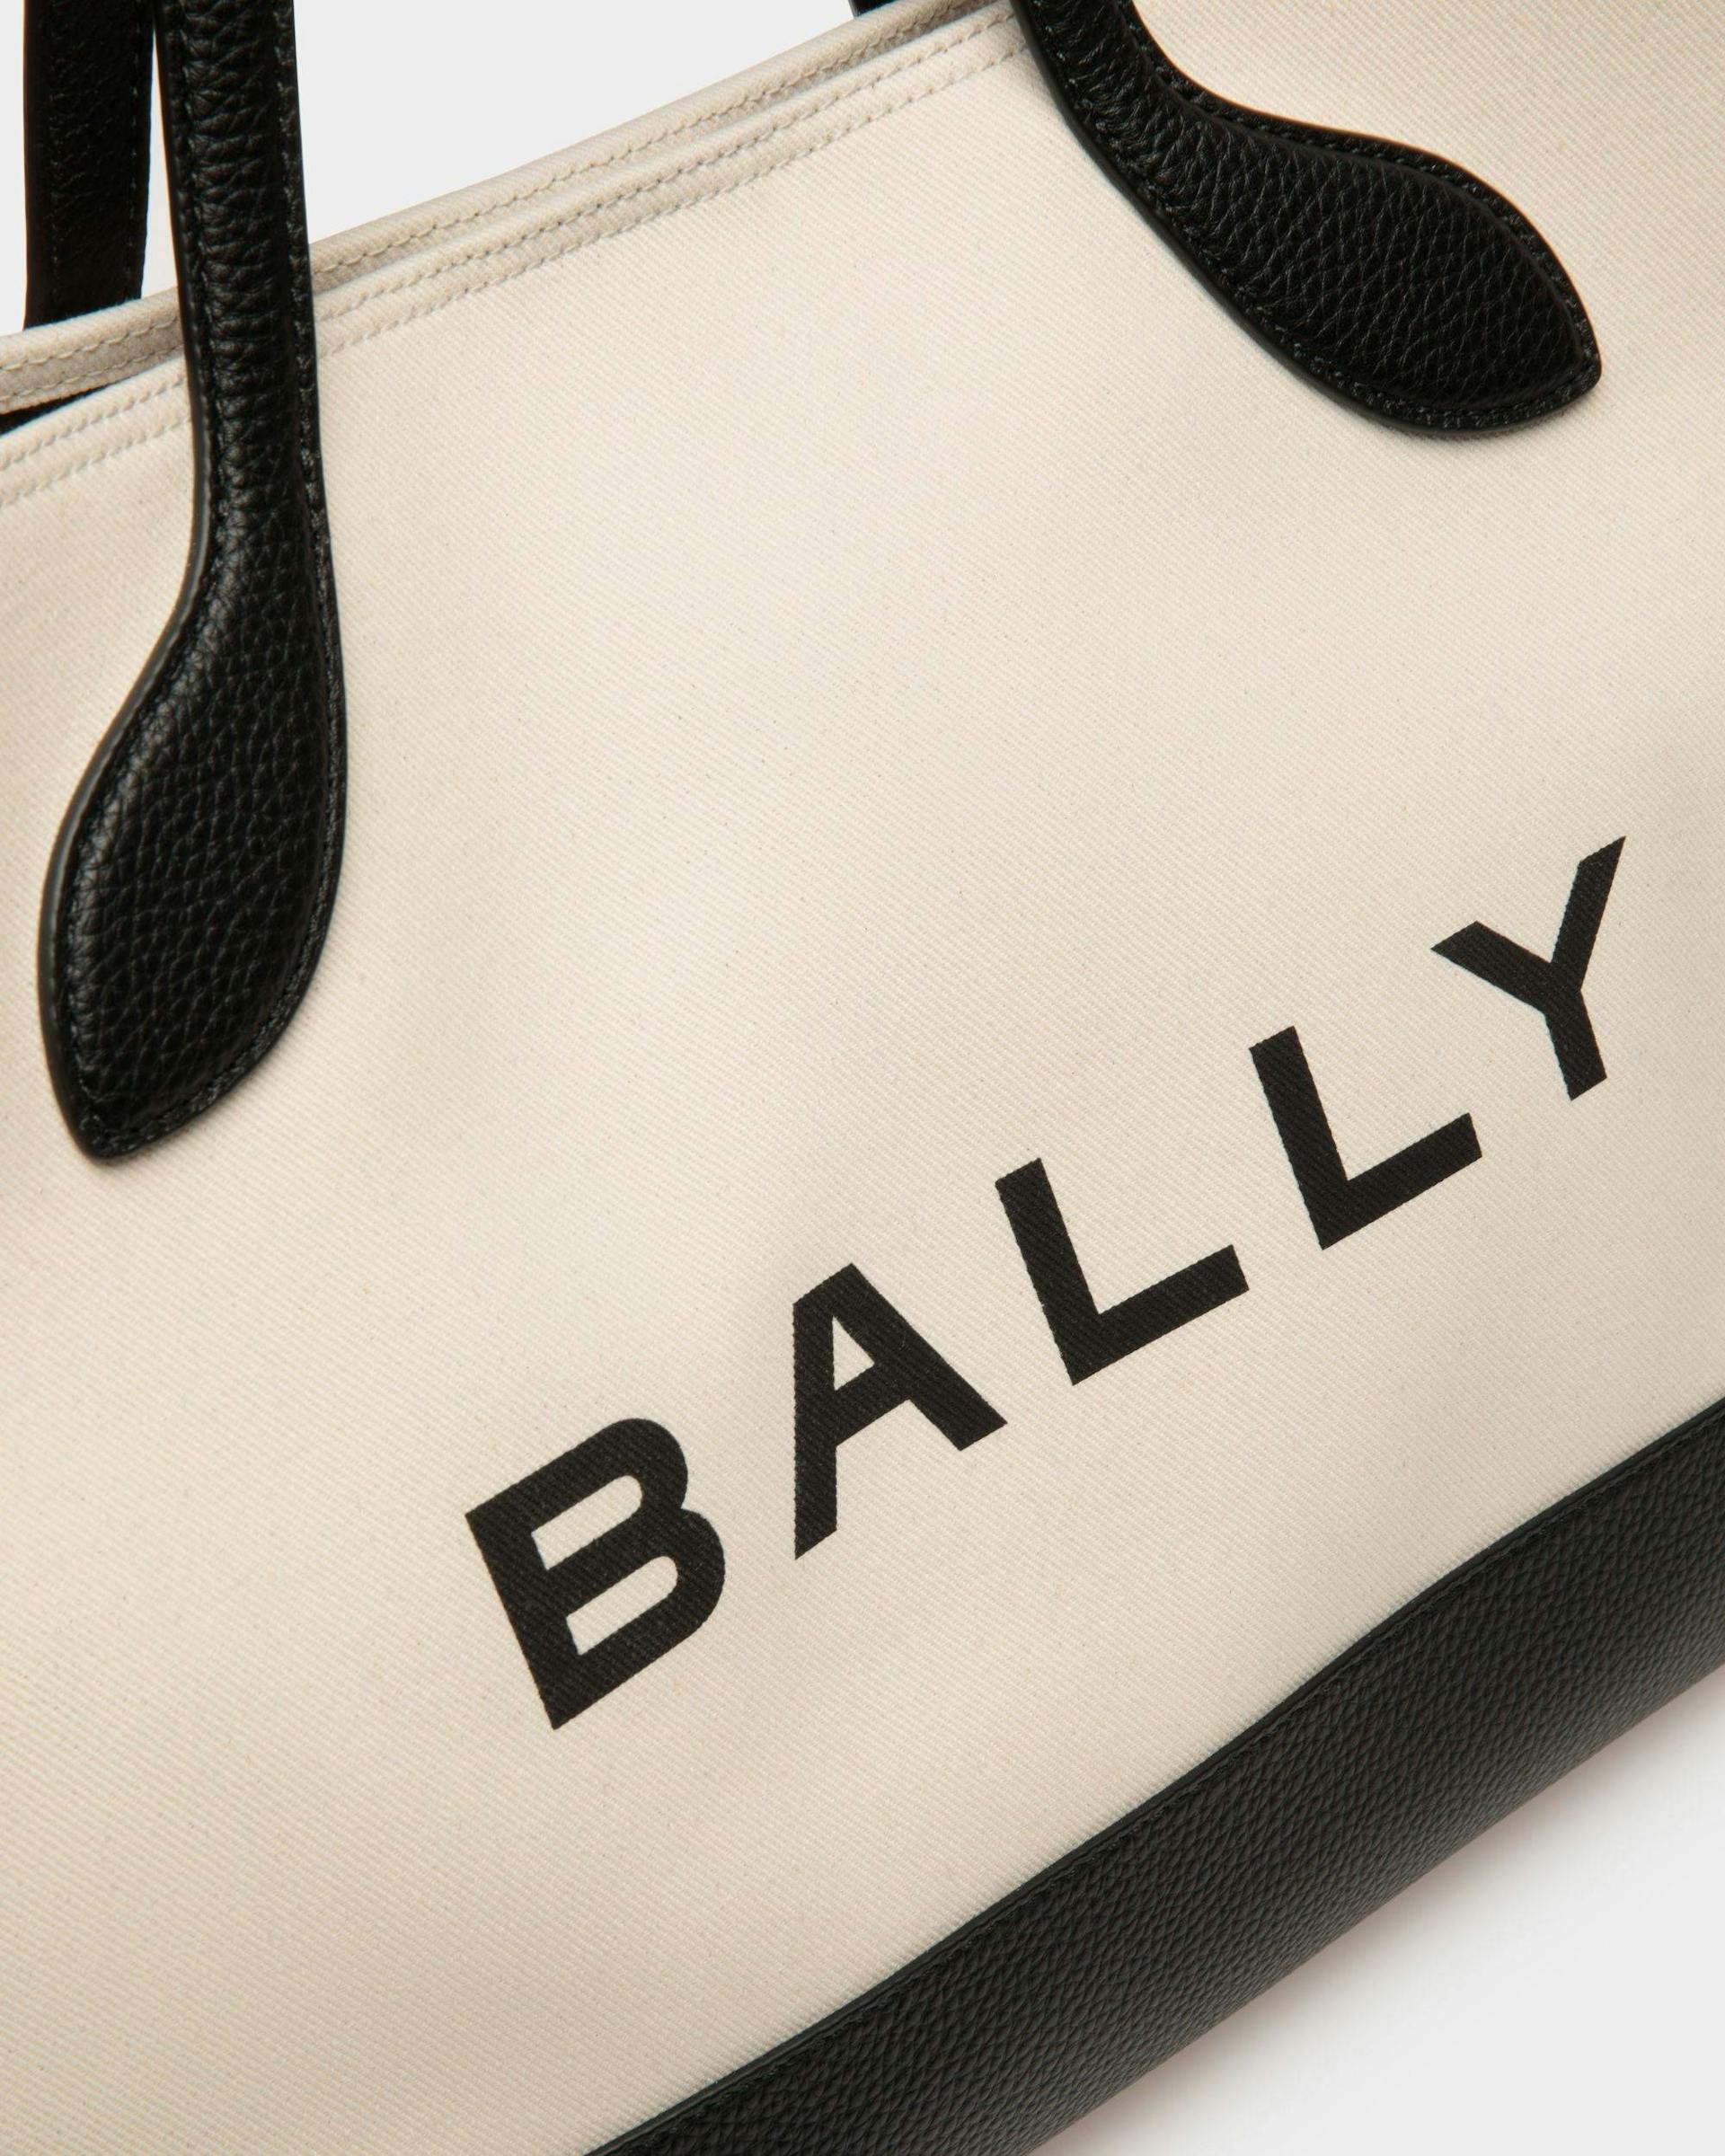 Bar Tote Bag In Natural And Black Fabric - Women's - Bally - 05